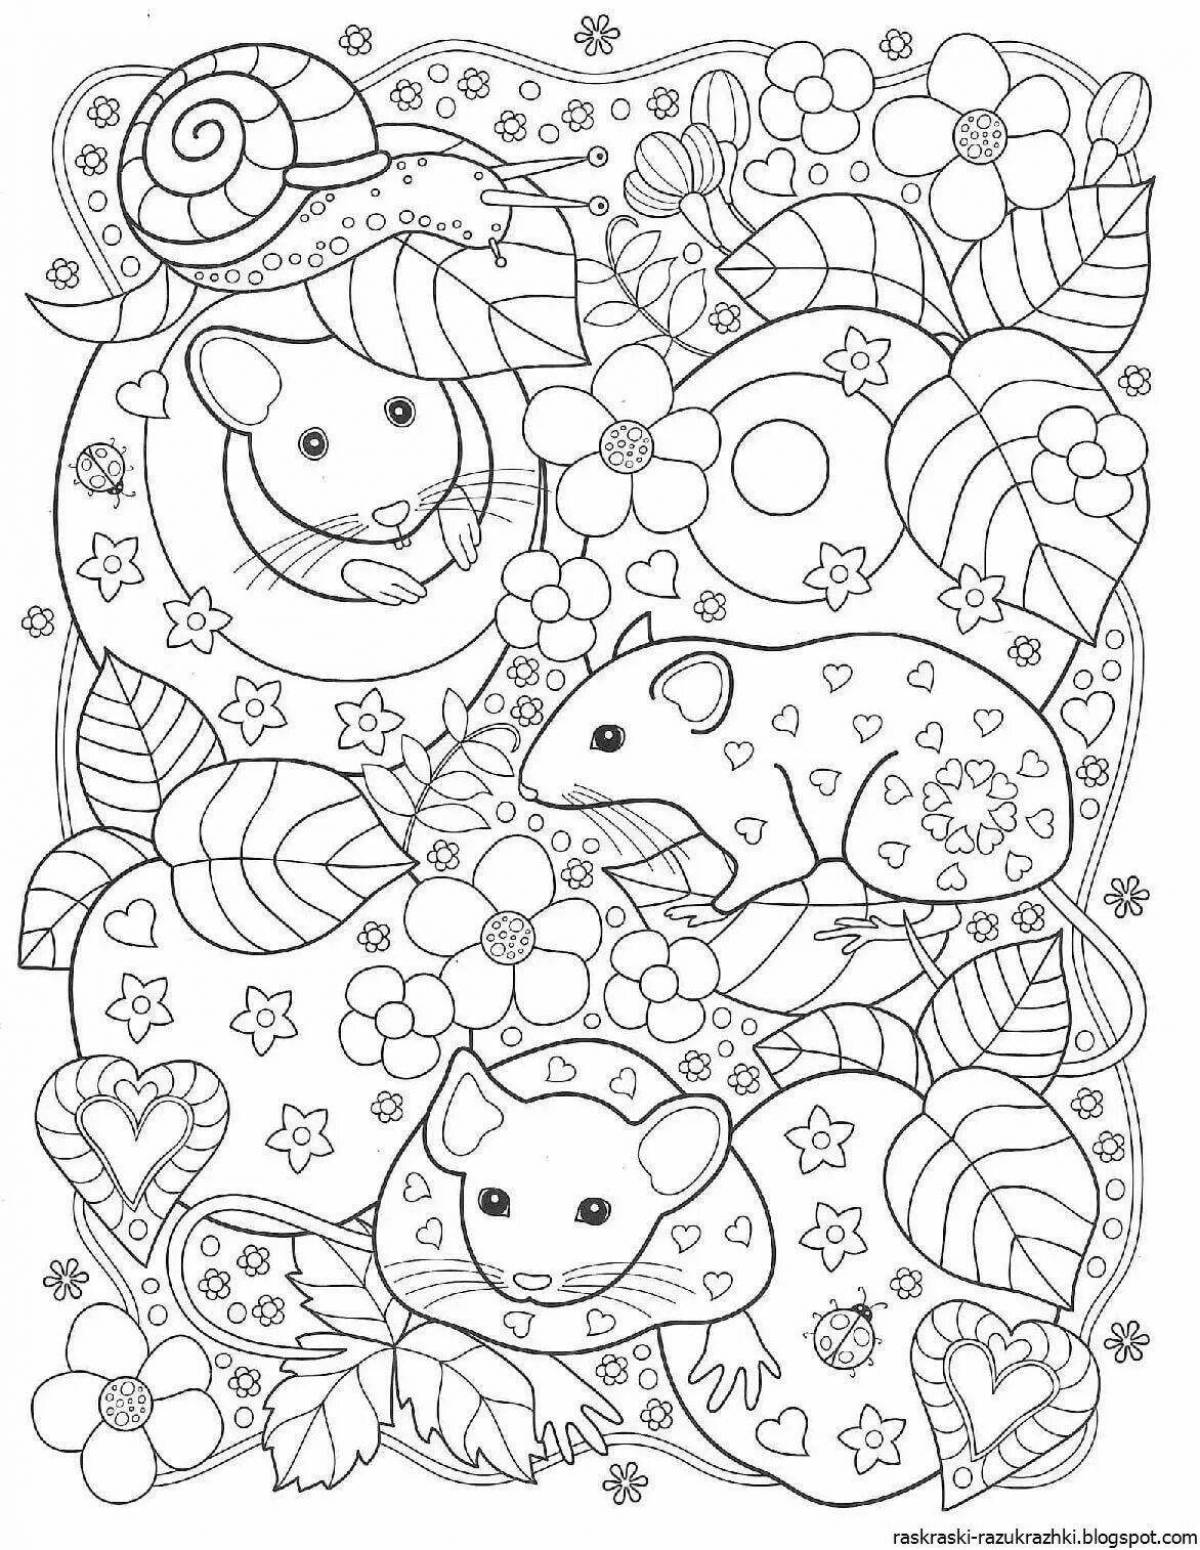 Amazing little coloring book for kids